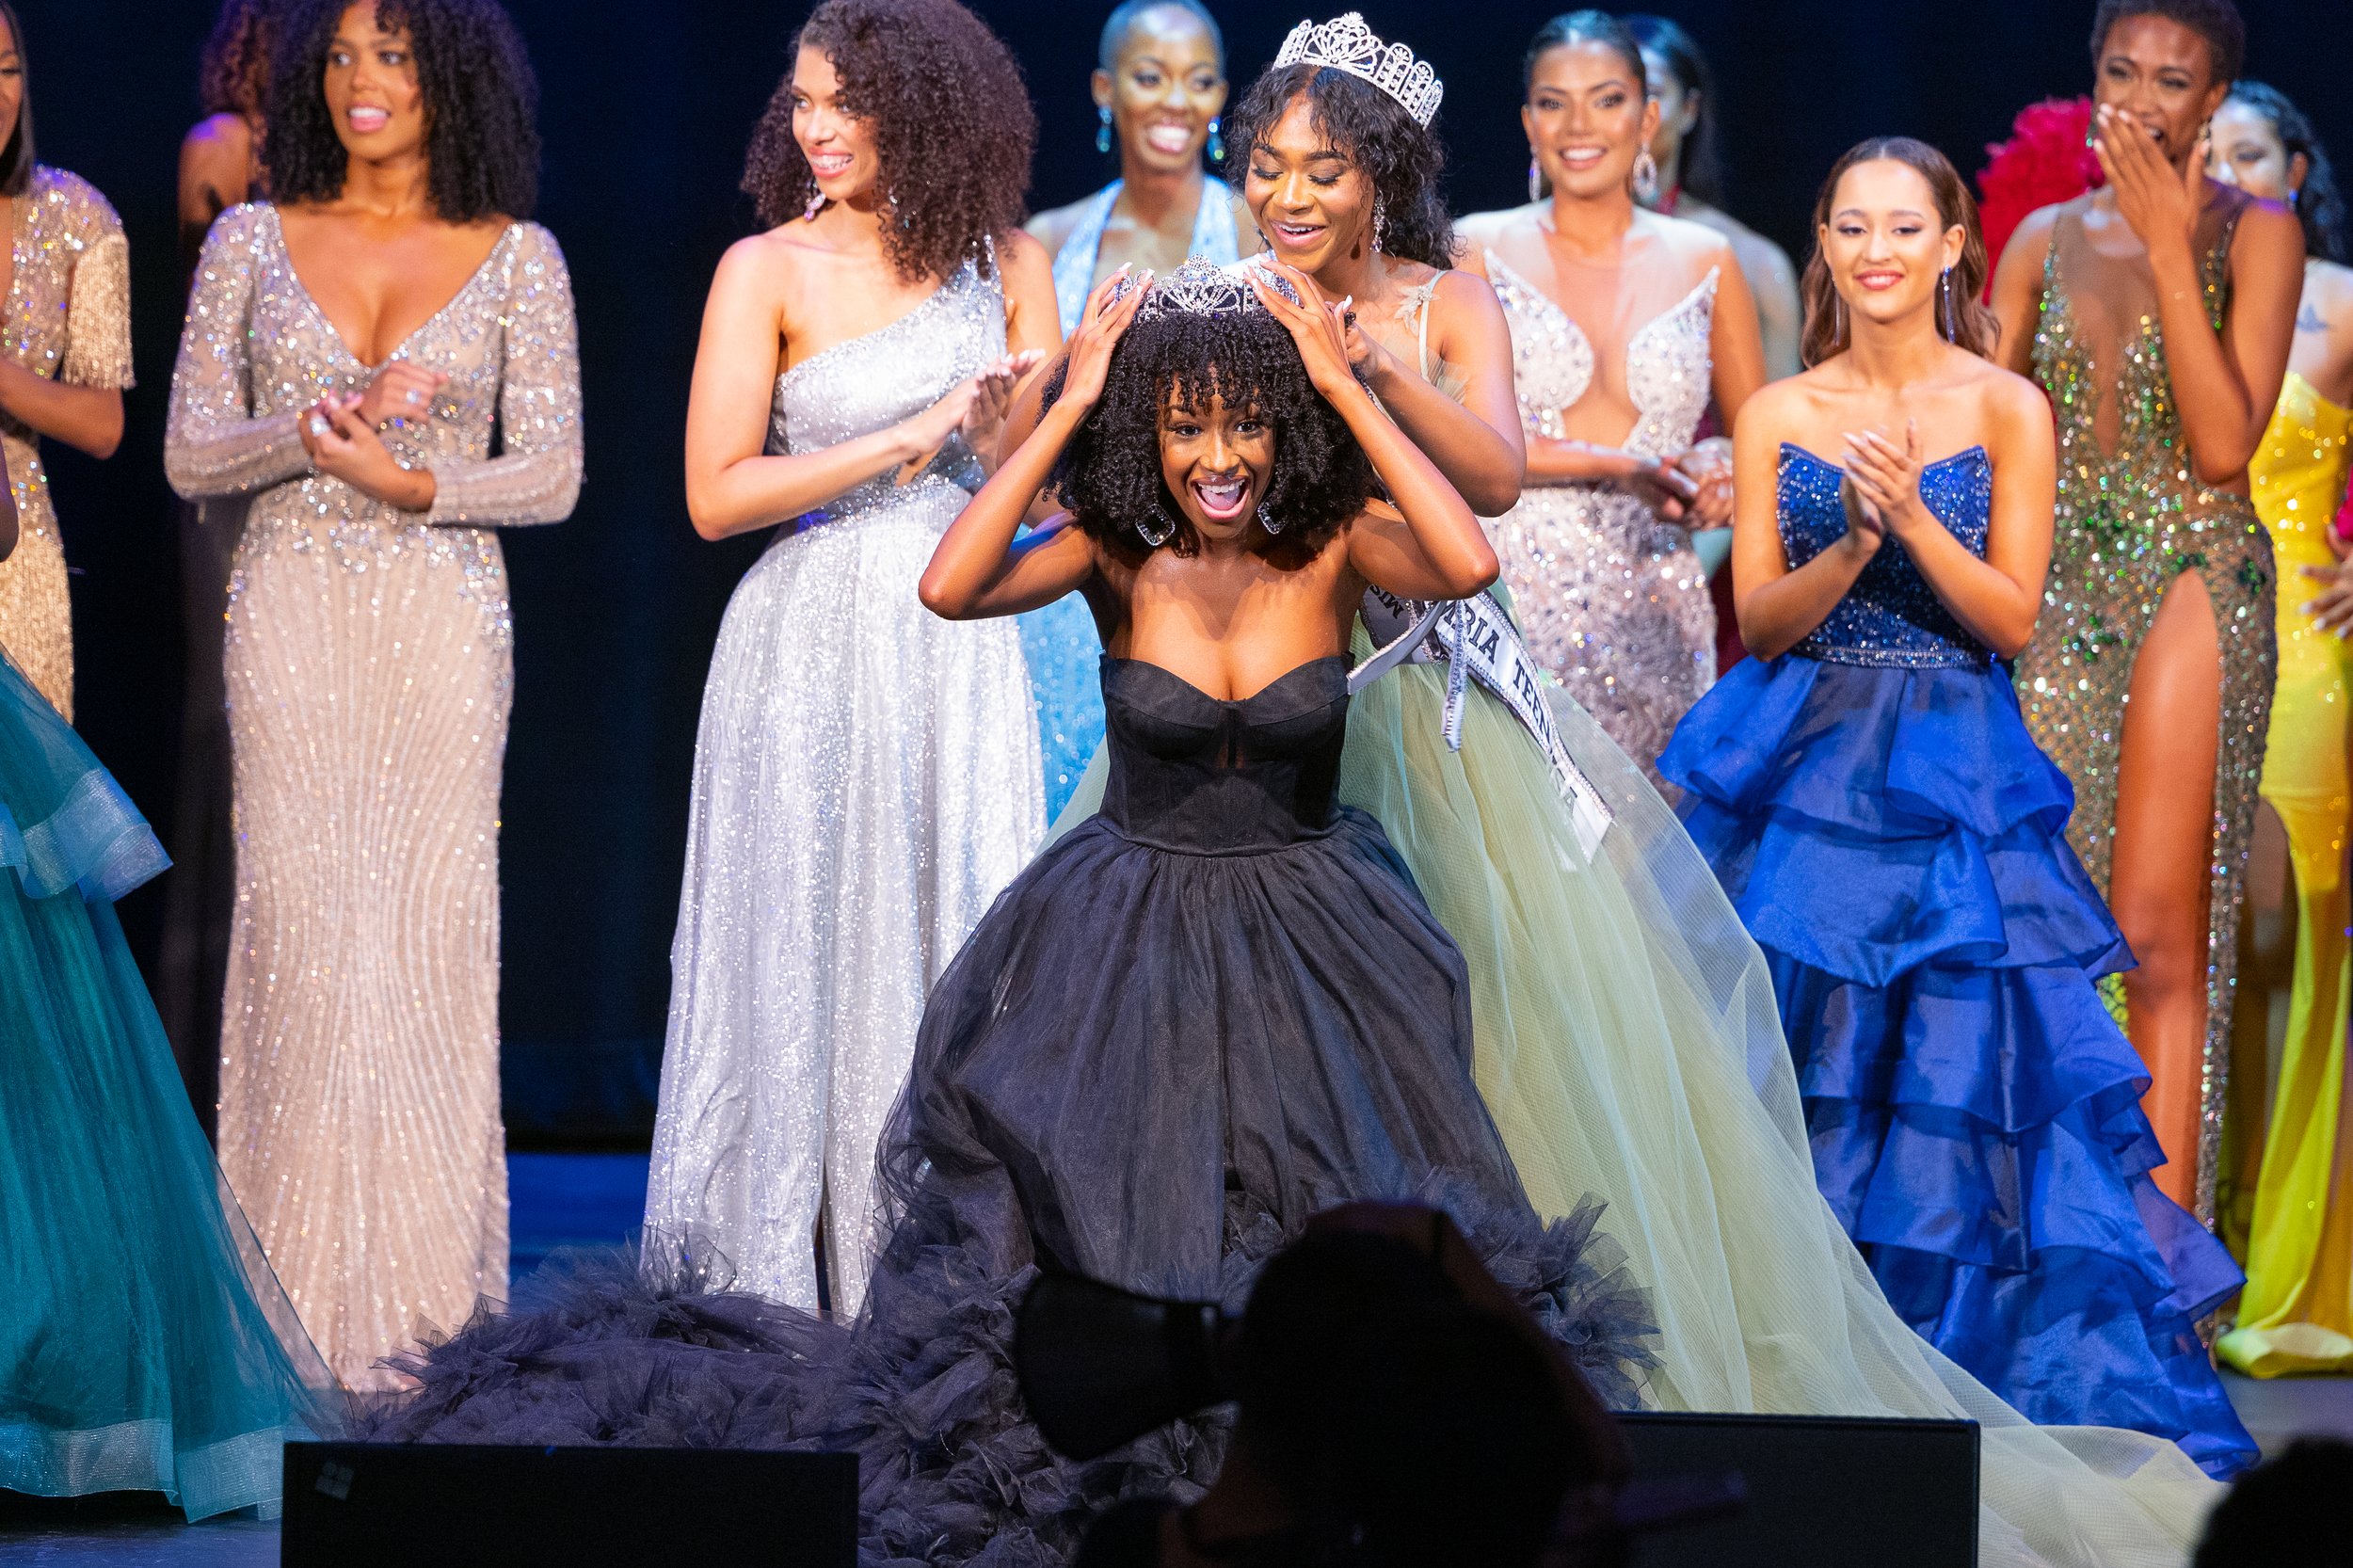 Asia Chisley was crowned Miss District of Columbia Teen USA 2023